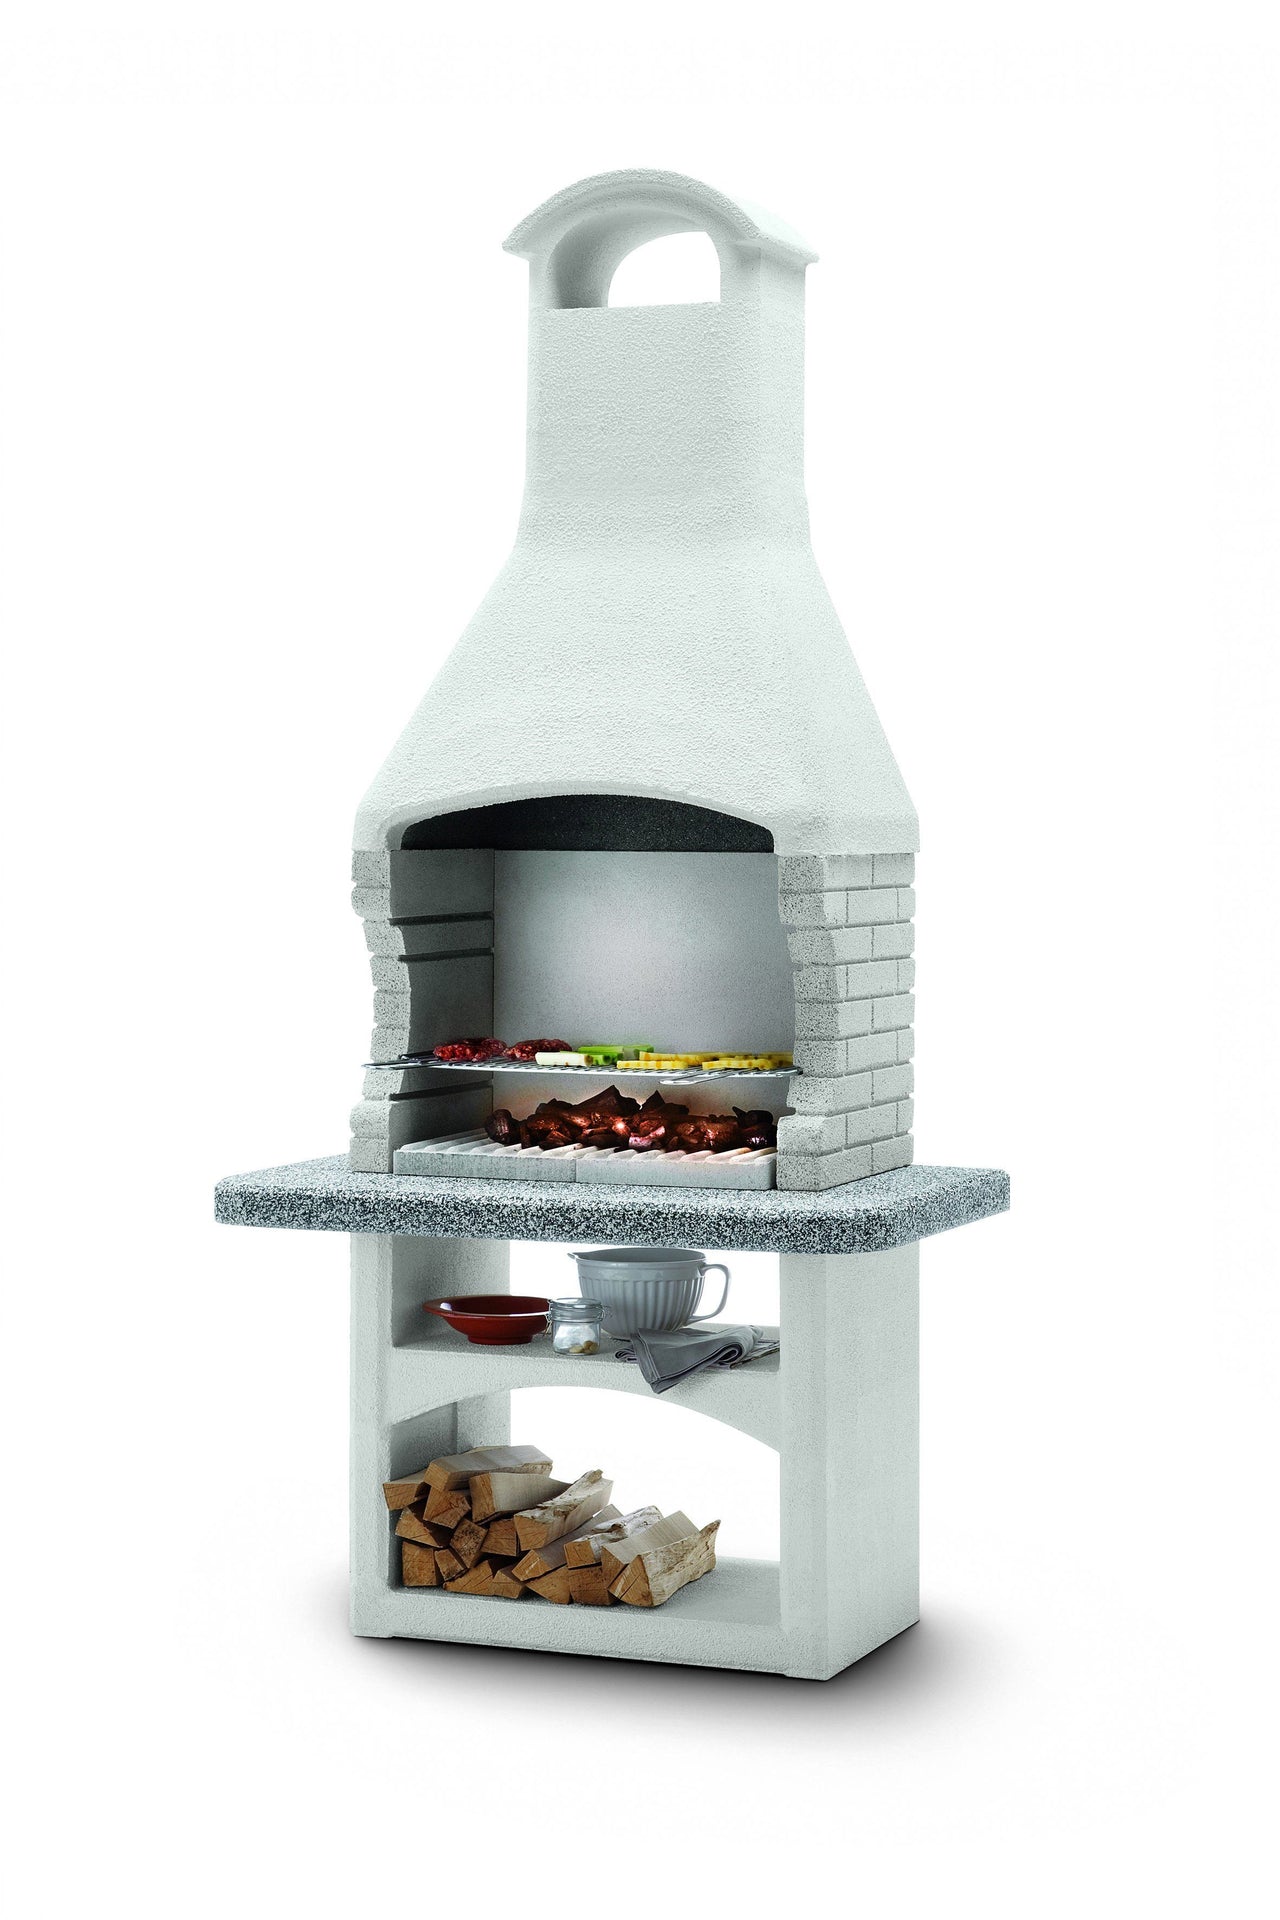 Palazzetti GALAPAGOS Barbecue Outdoor Cooking Grill By Paini Pizza Ovens Paini 